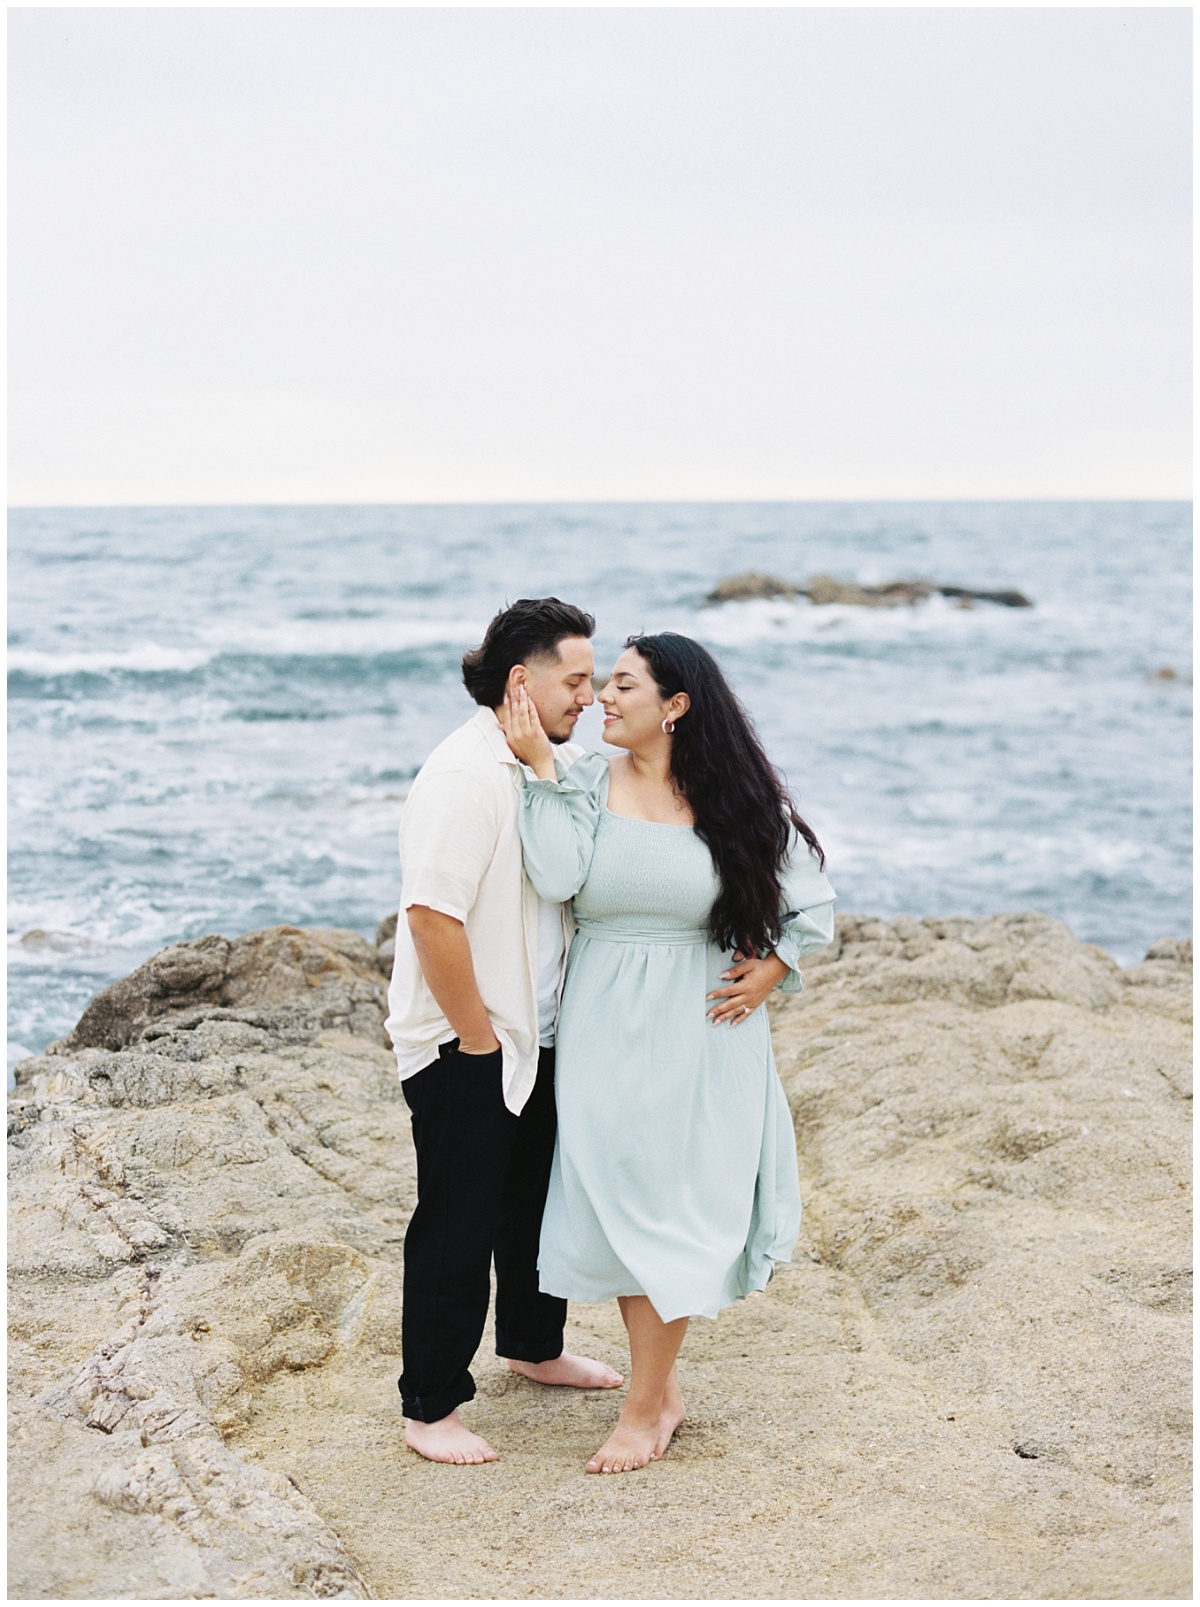 Couple at the Beach in Pacific Grove for their Engagement Session with Intimate posing